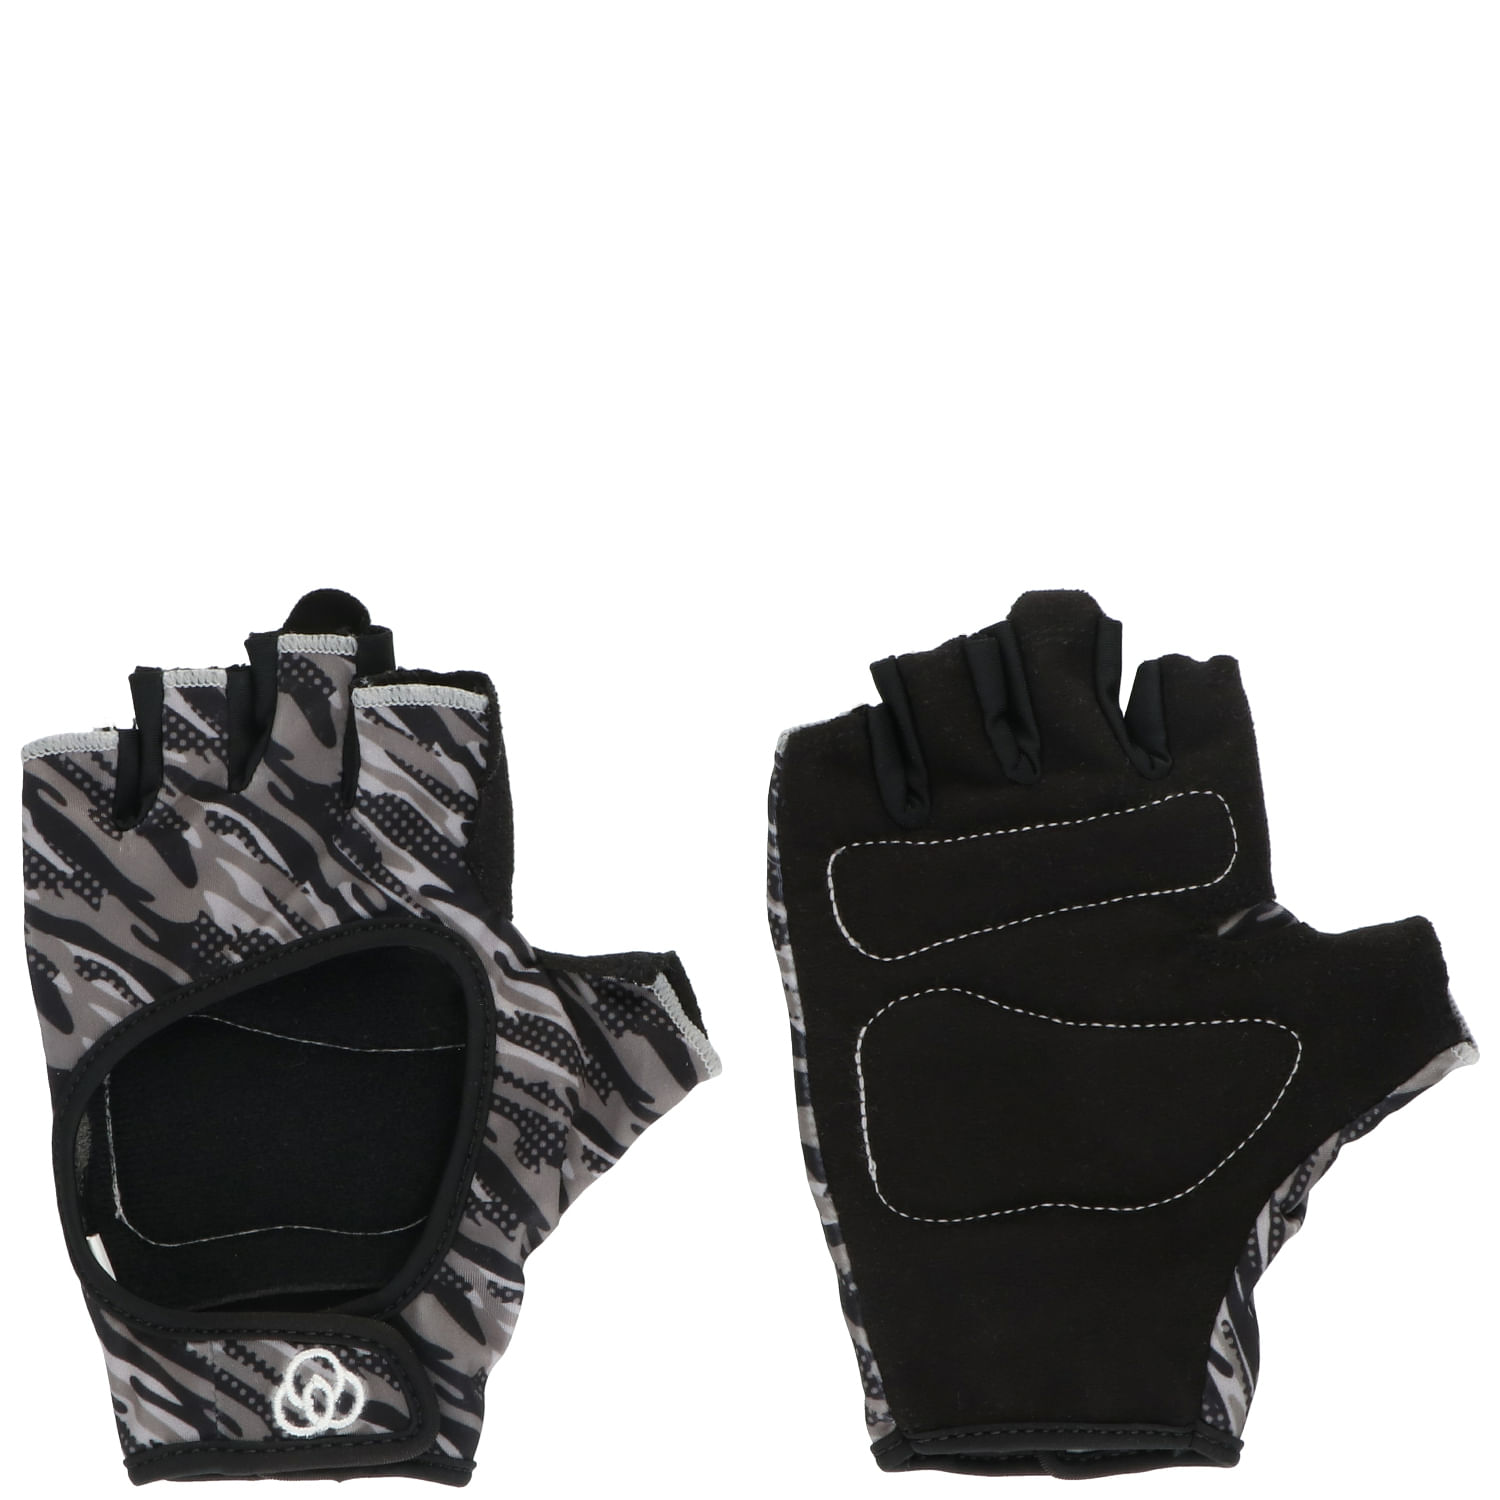 Guantes Fitness Mujer Blu Fit Negro